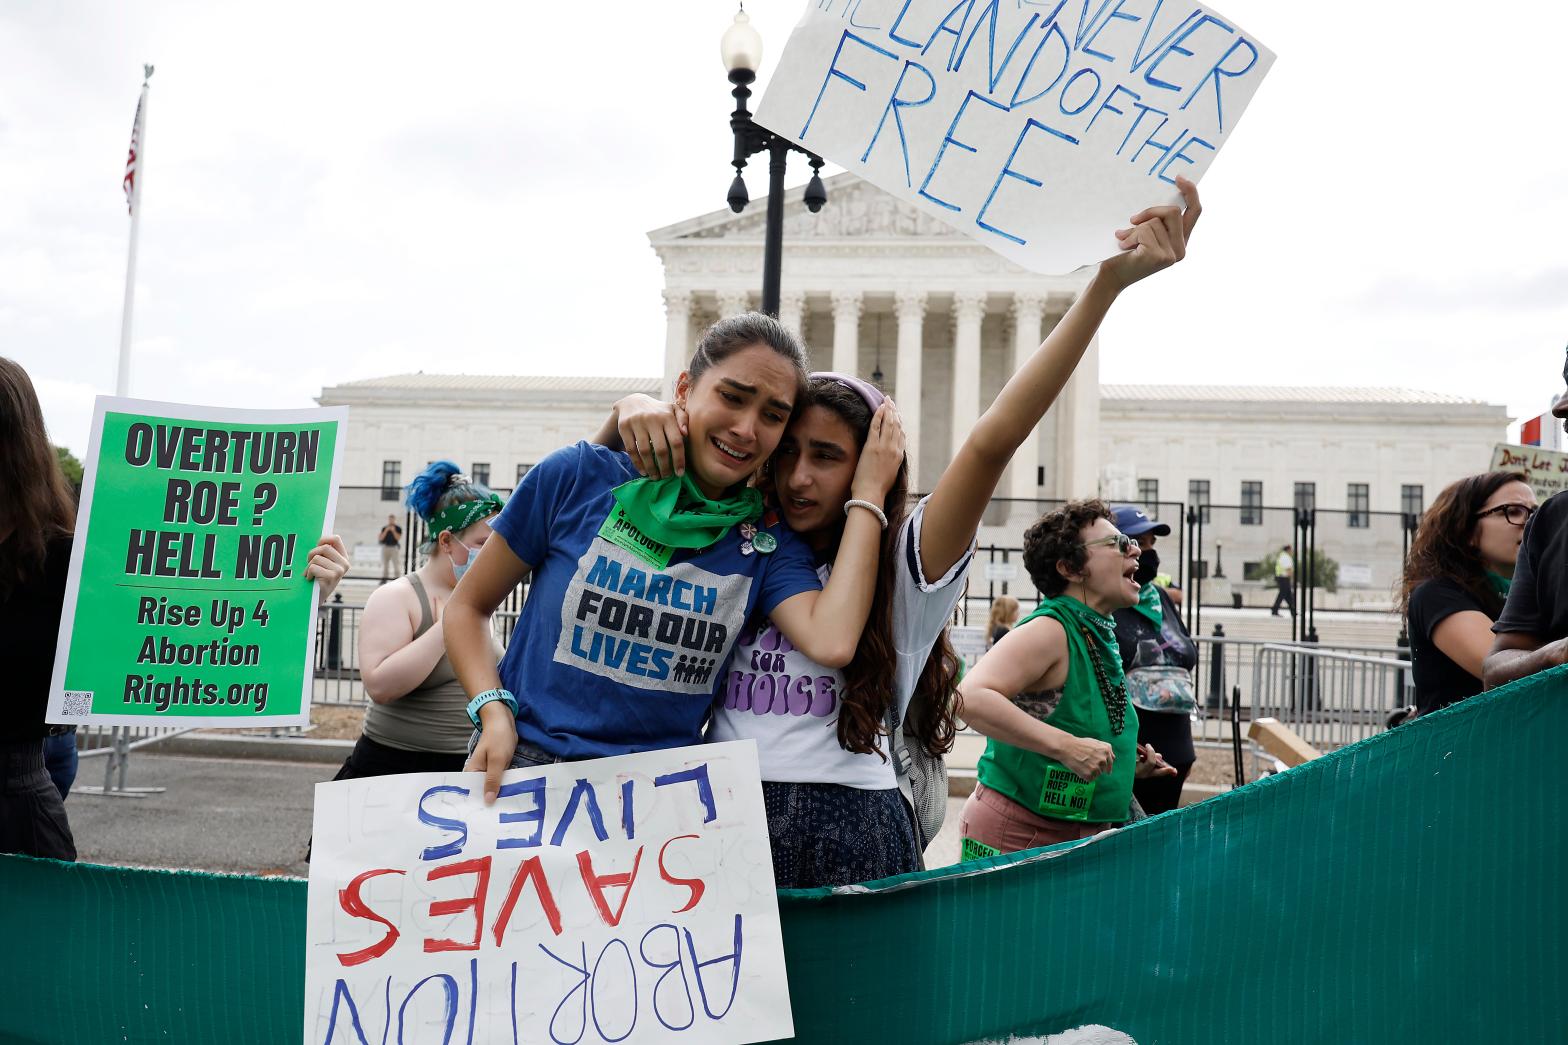 Protestors react to the Dobbs v Jackson Women's Health Organisation ruling which overturns the landmark abortion Roe v. Wade case in front of the U.S. Supreme Court on June 24, 2022 in Washington, DC. (Photo: Anna Moneymaker, Getty Images)